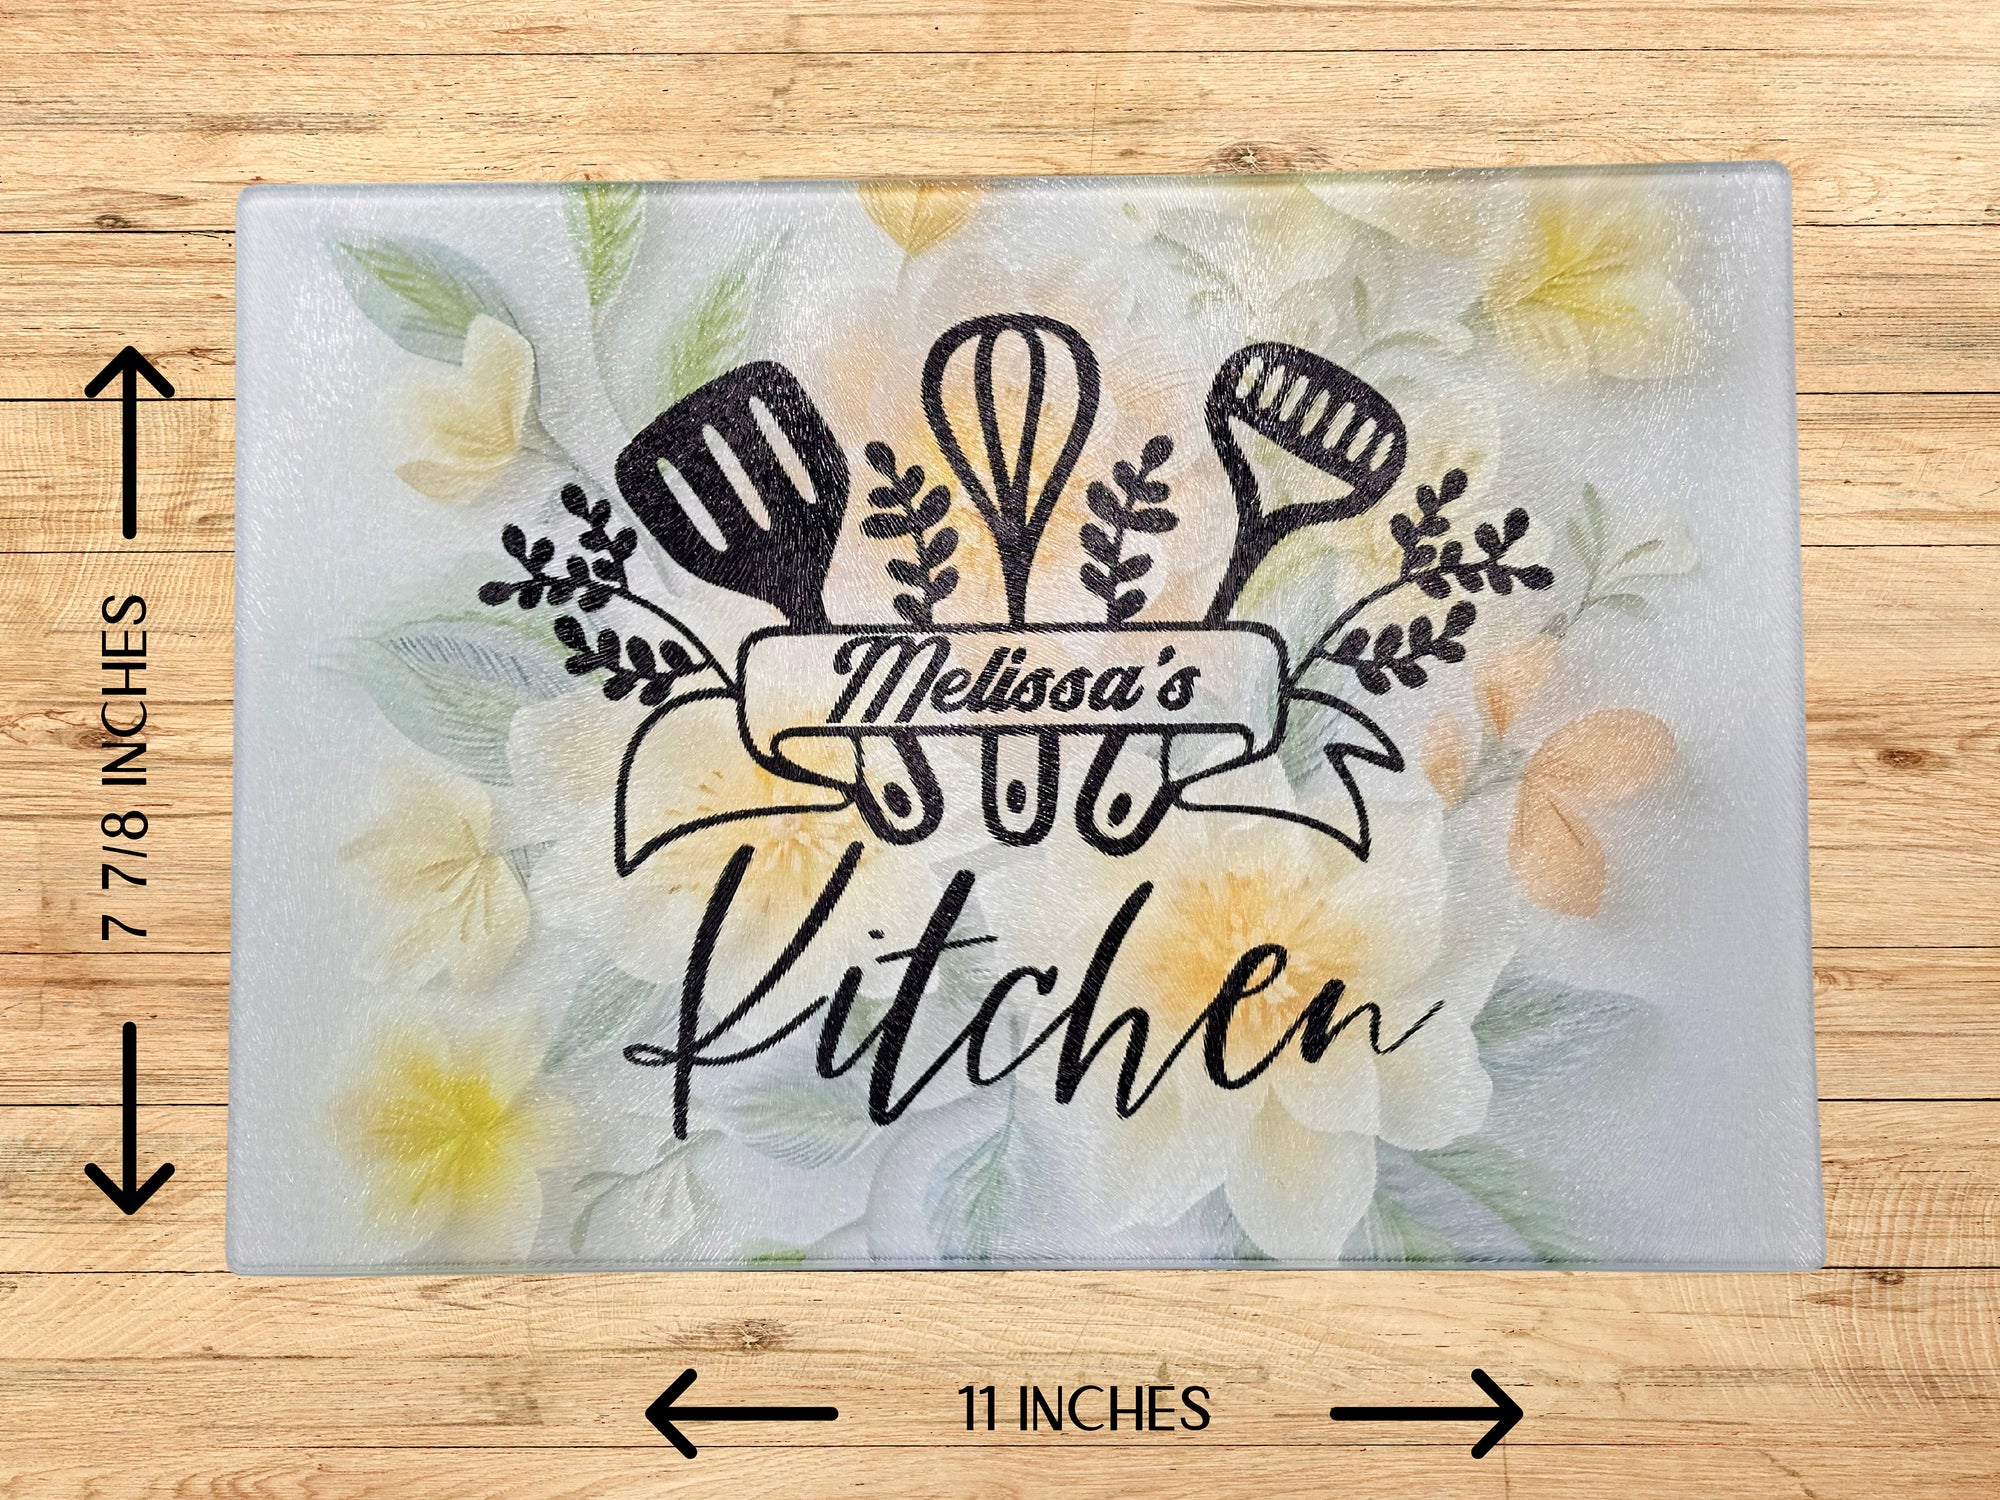 Personalized 8" x 11" Textured & Tempered Glass Cutting Board/Flowers and Utensils Design/Space Saving Kitchen Accessory/#500